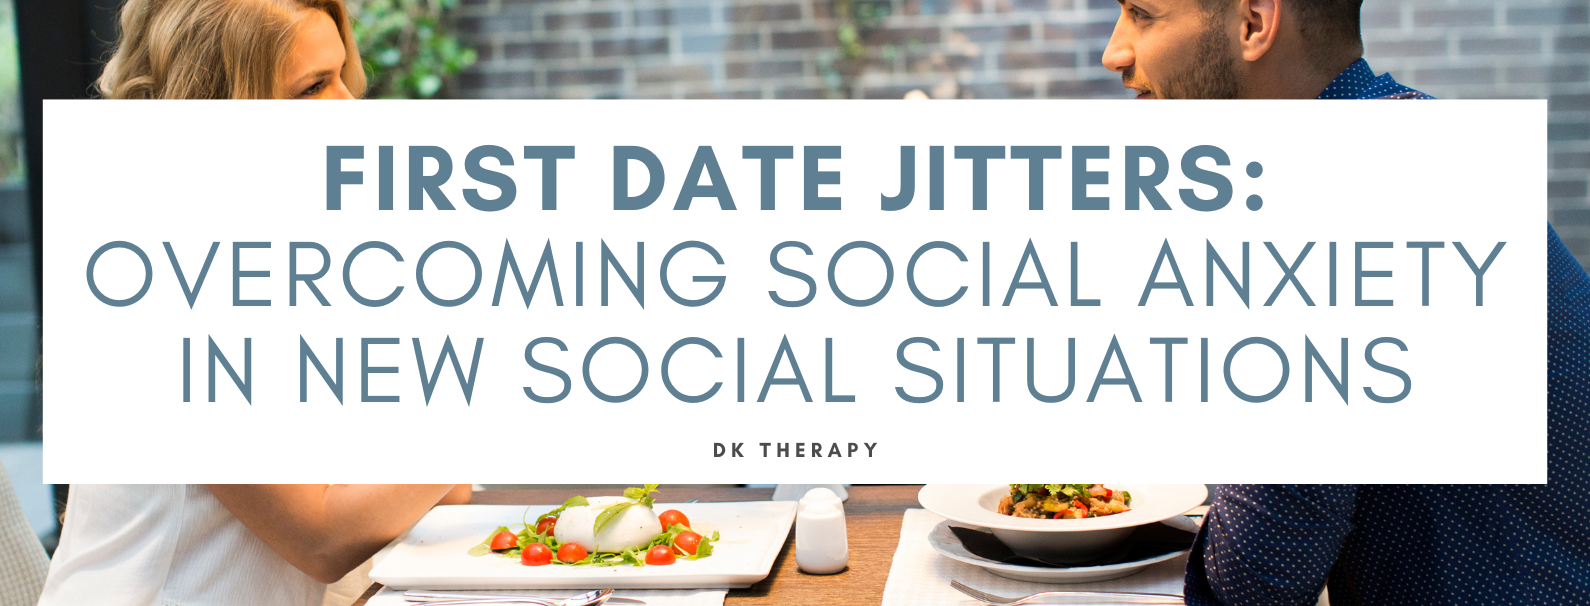 First Date Jitters: Overcoming Social Anxiety in New Social Situations